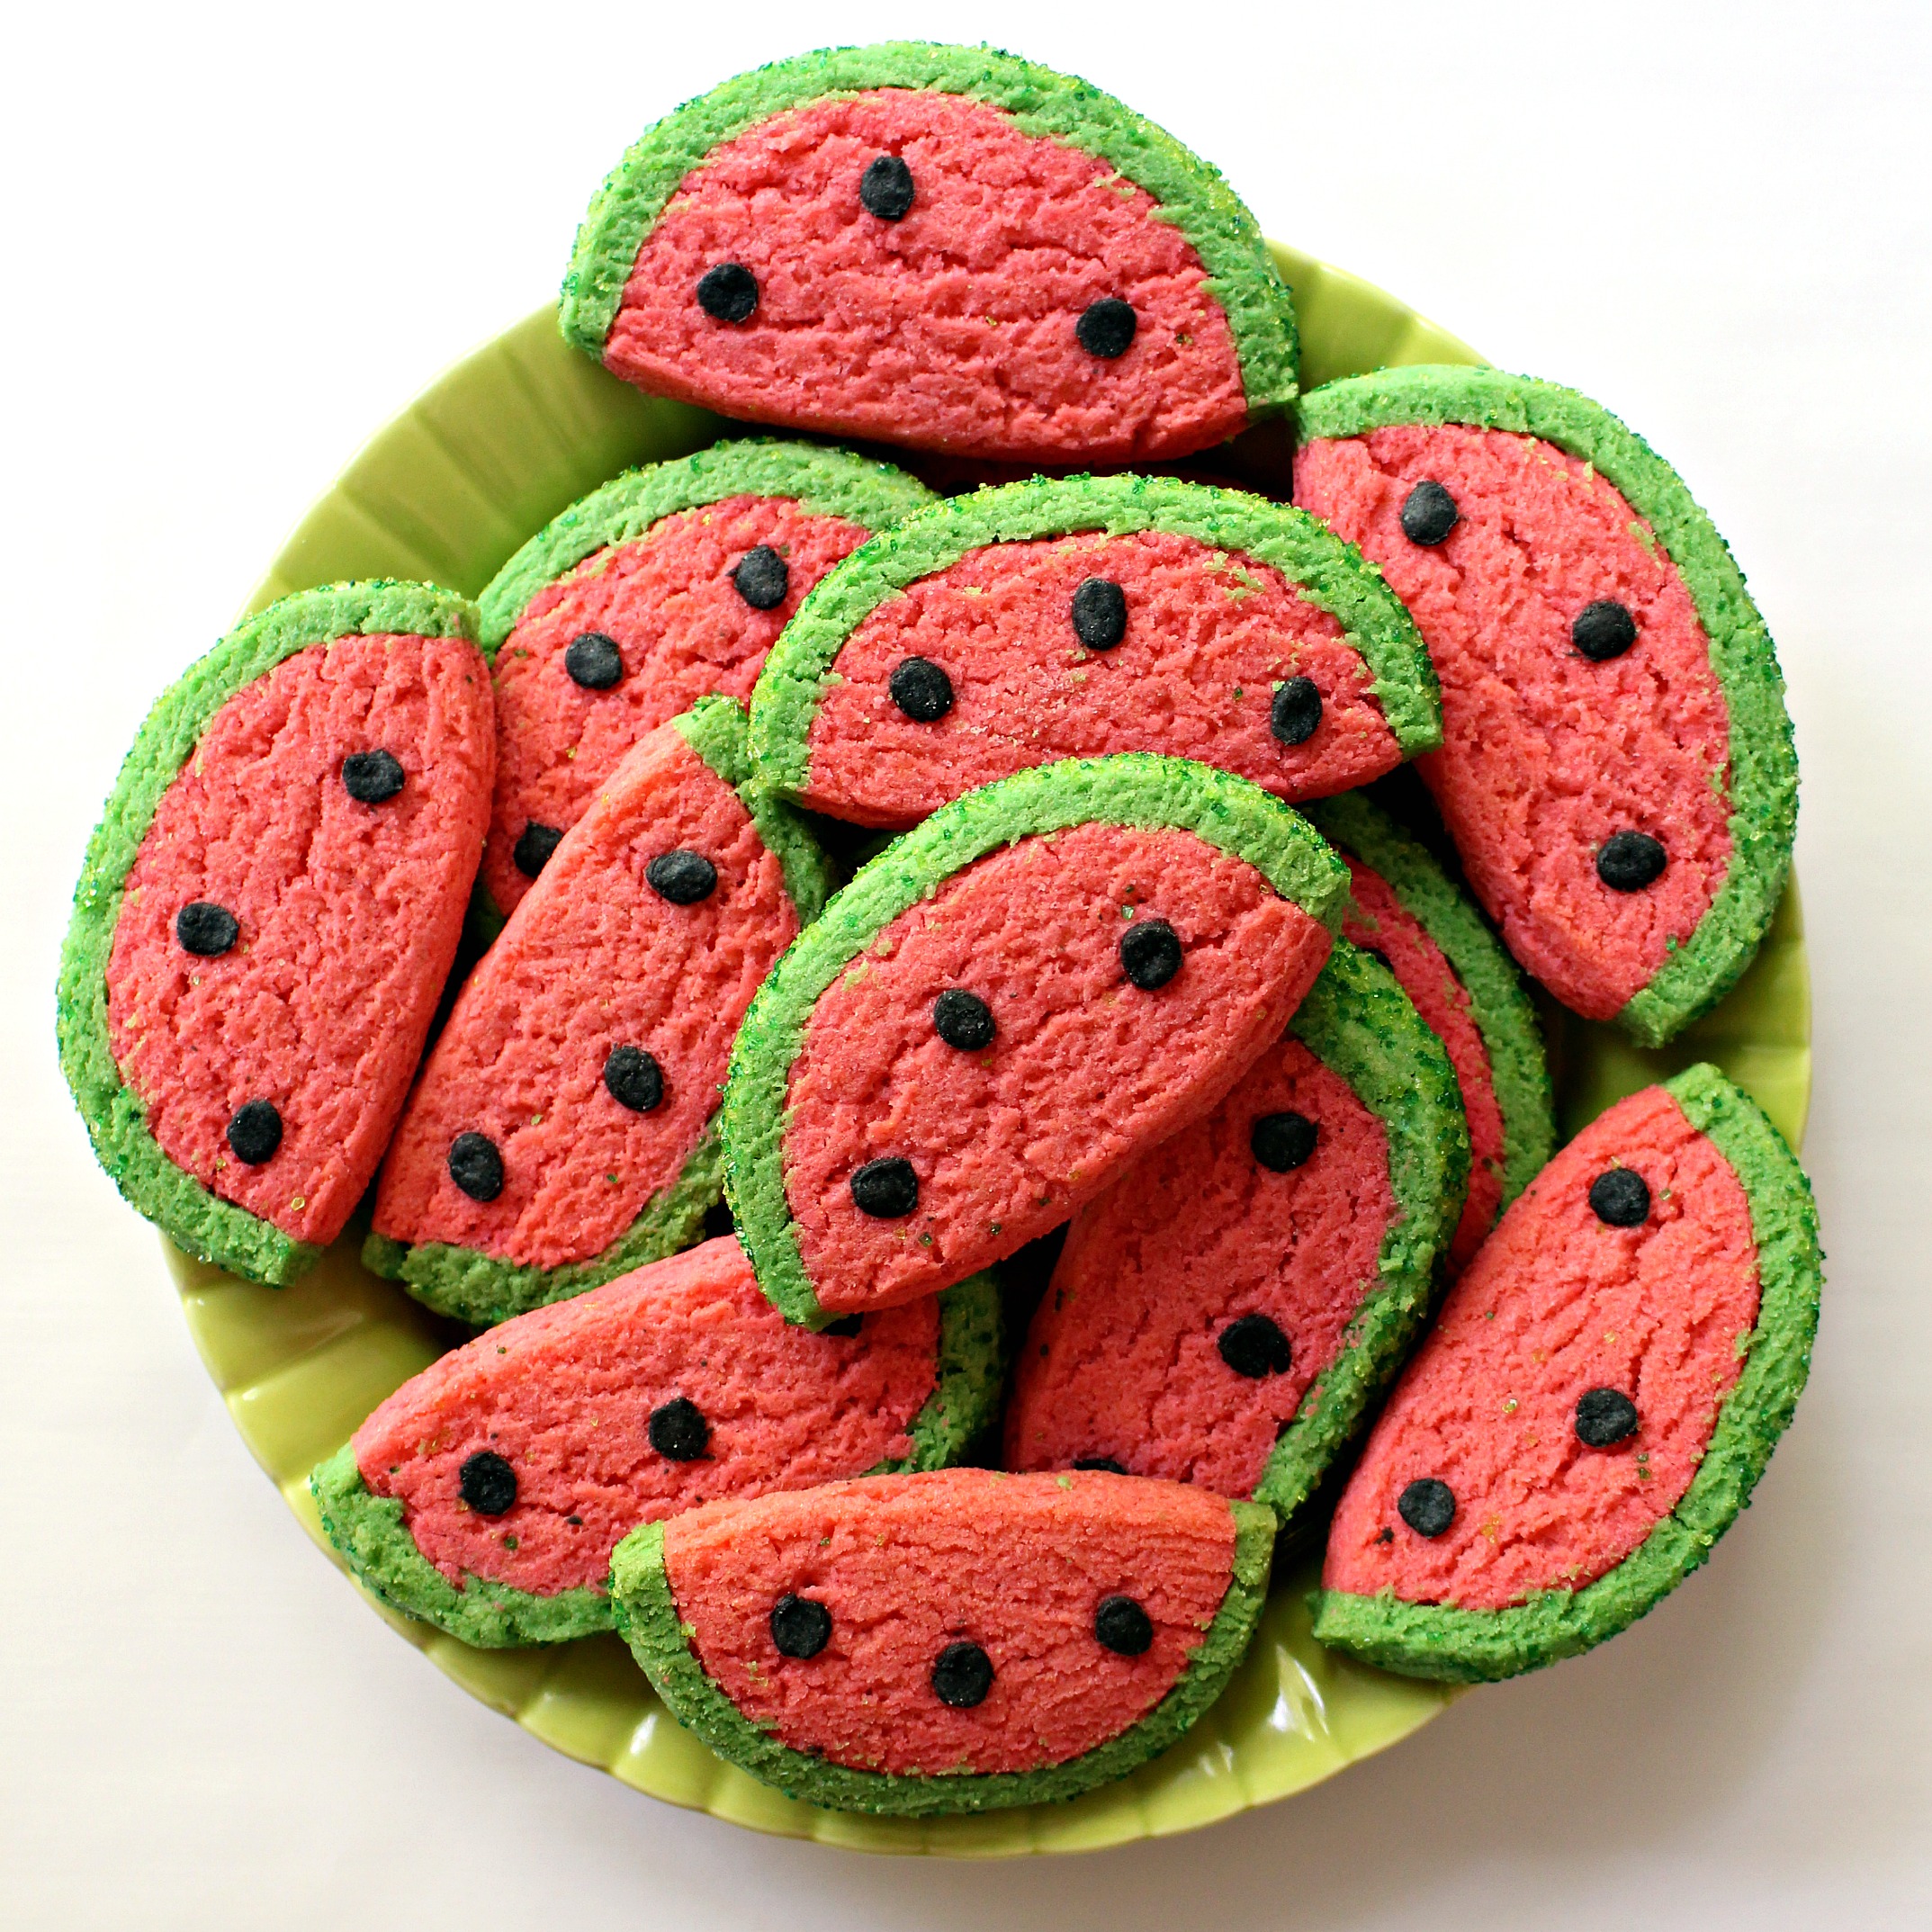 Watermelon Sugar Cookies for Military Care Package #32 - The Monday Box